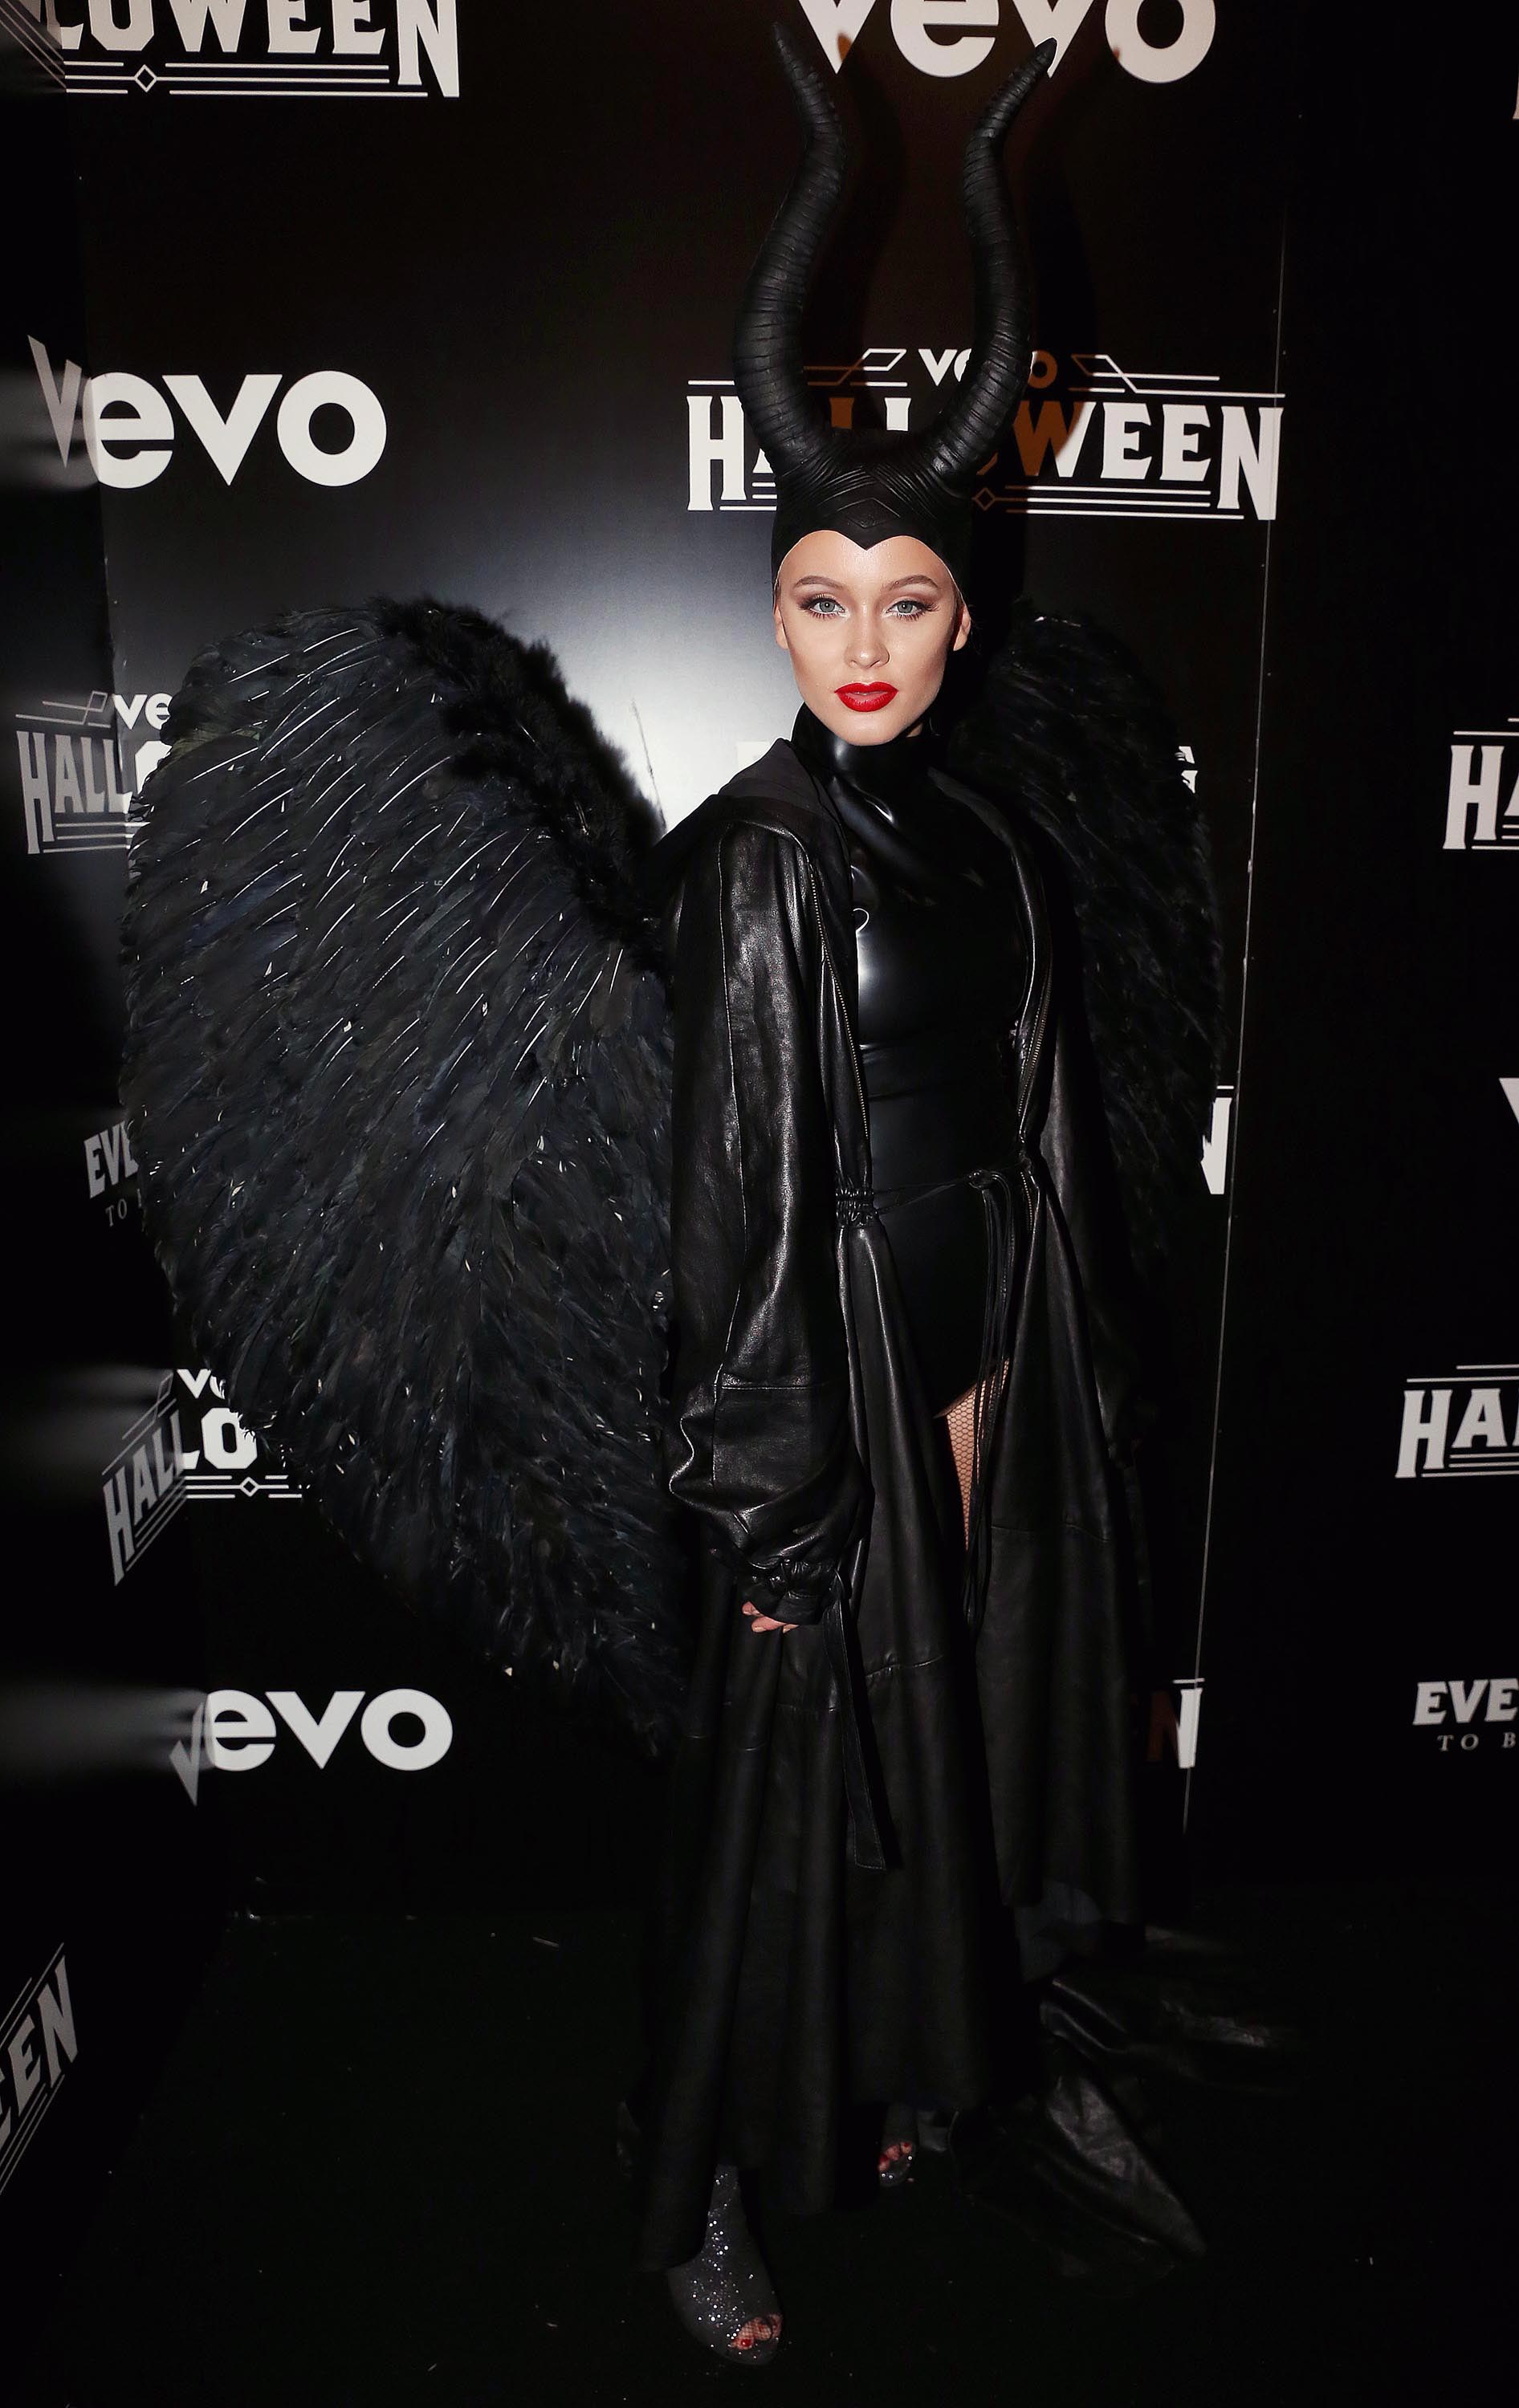 Zara Larsson attends VEVO’s Halloween event at Bromley-Moore Dock